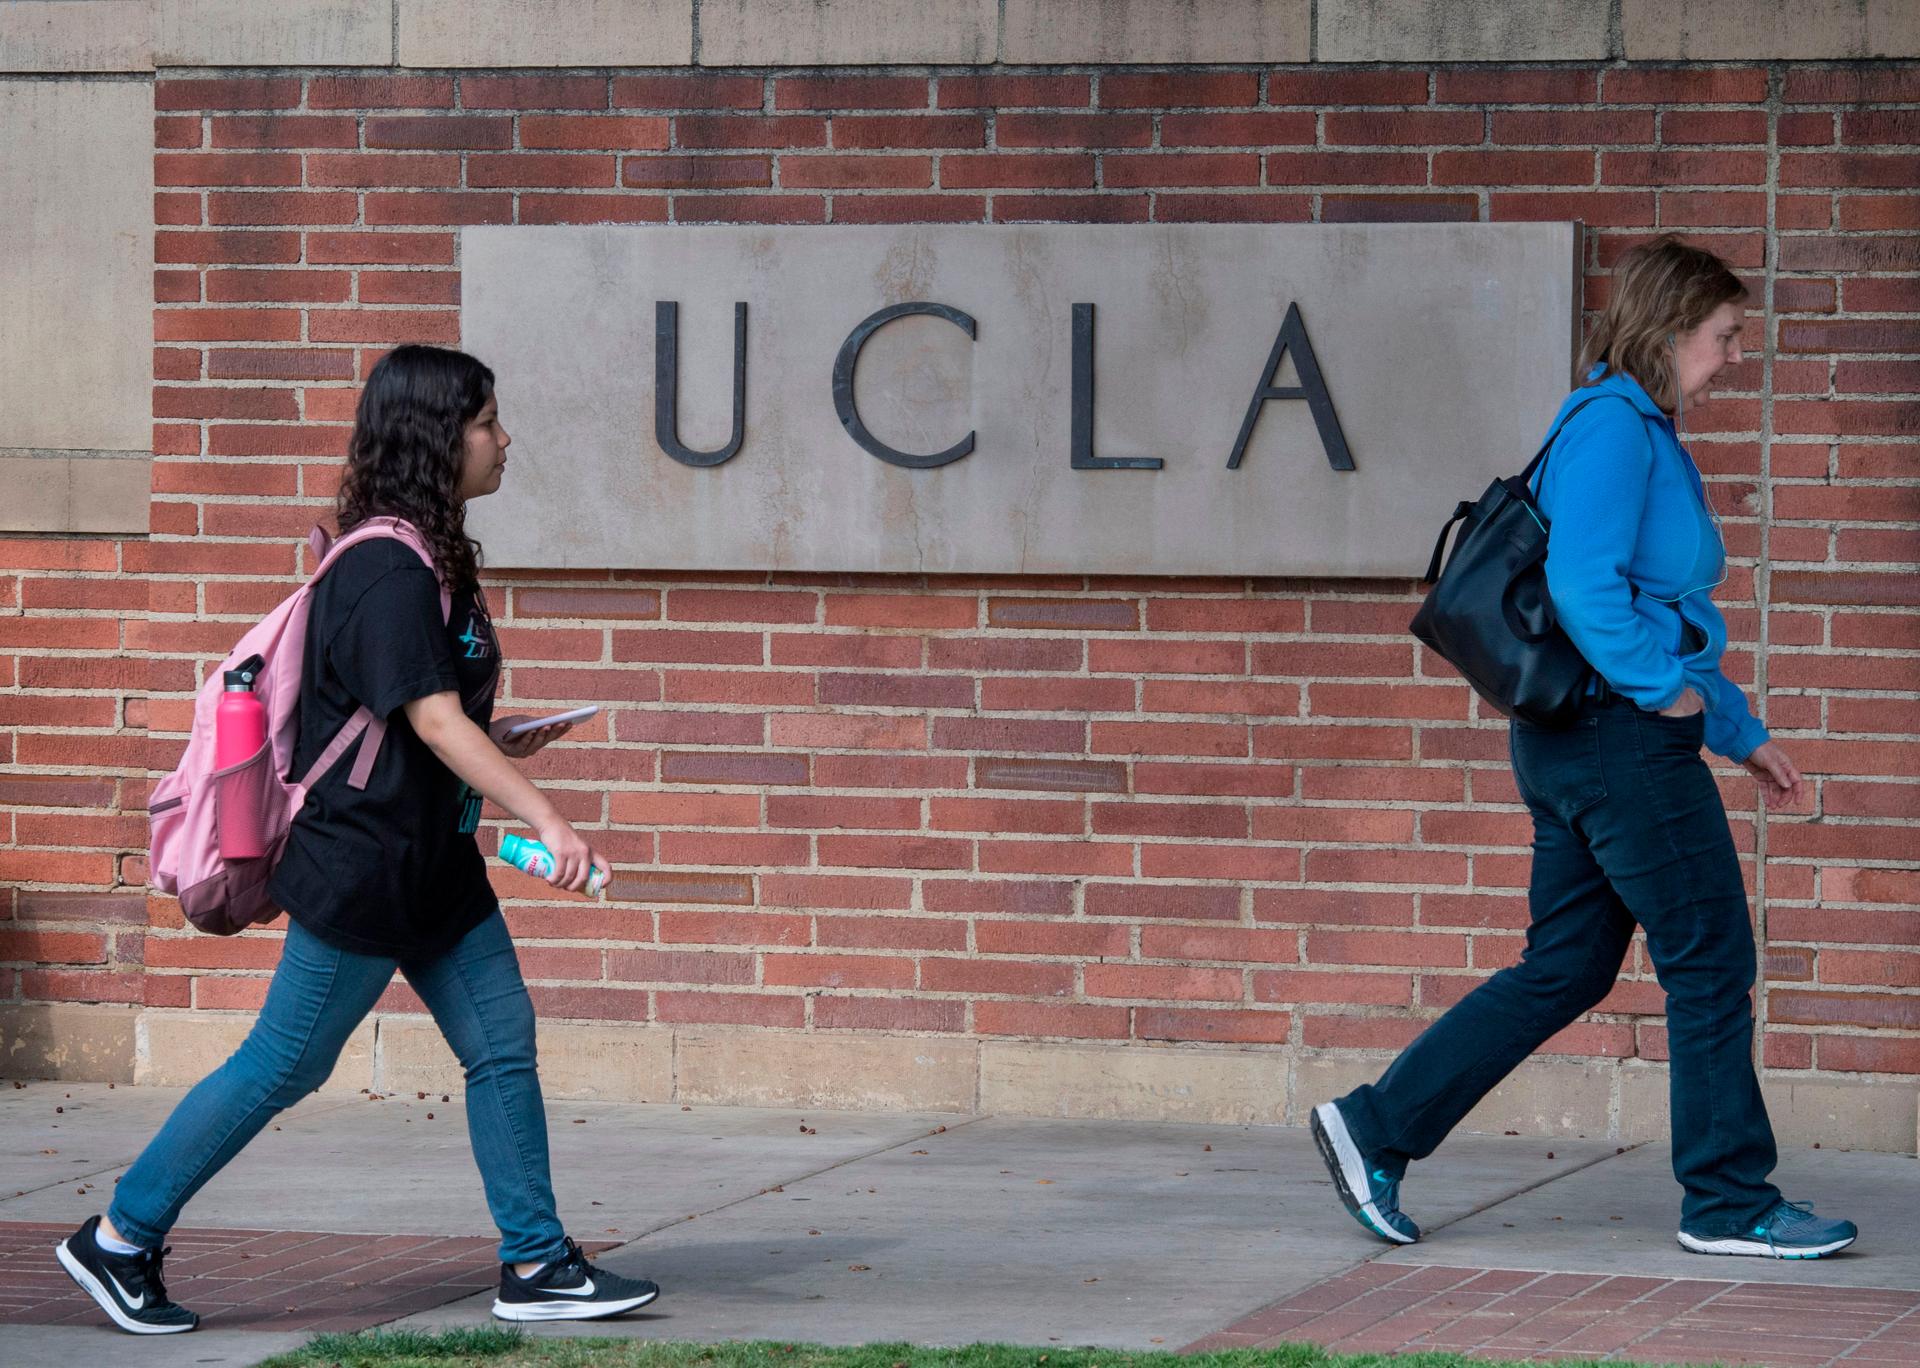 Public universities in California cannot consider race in admissions.